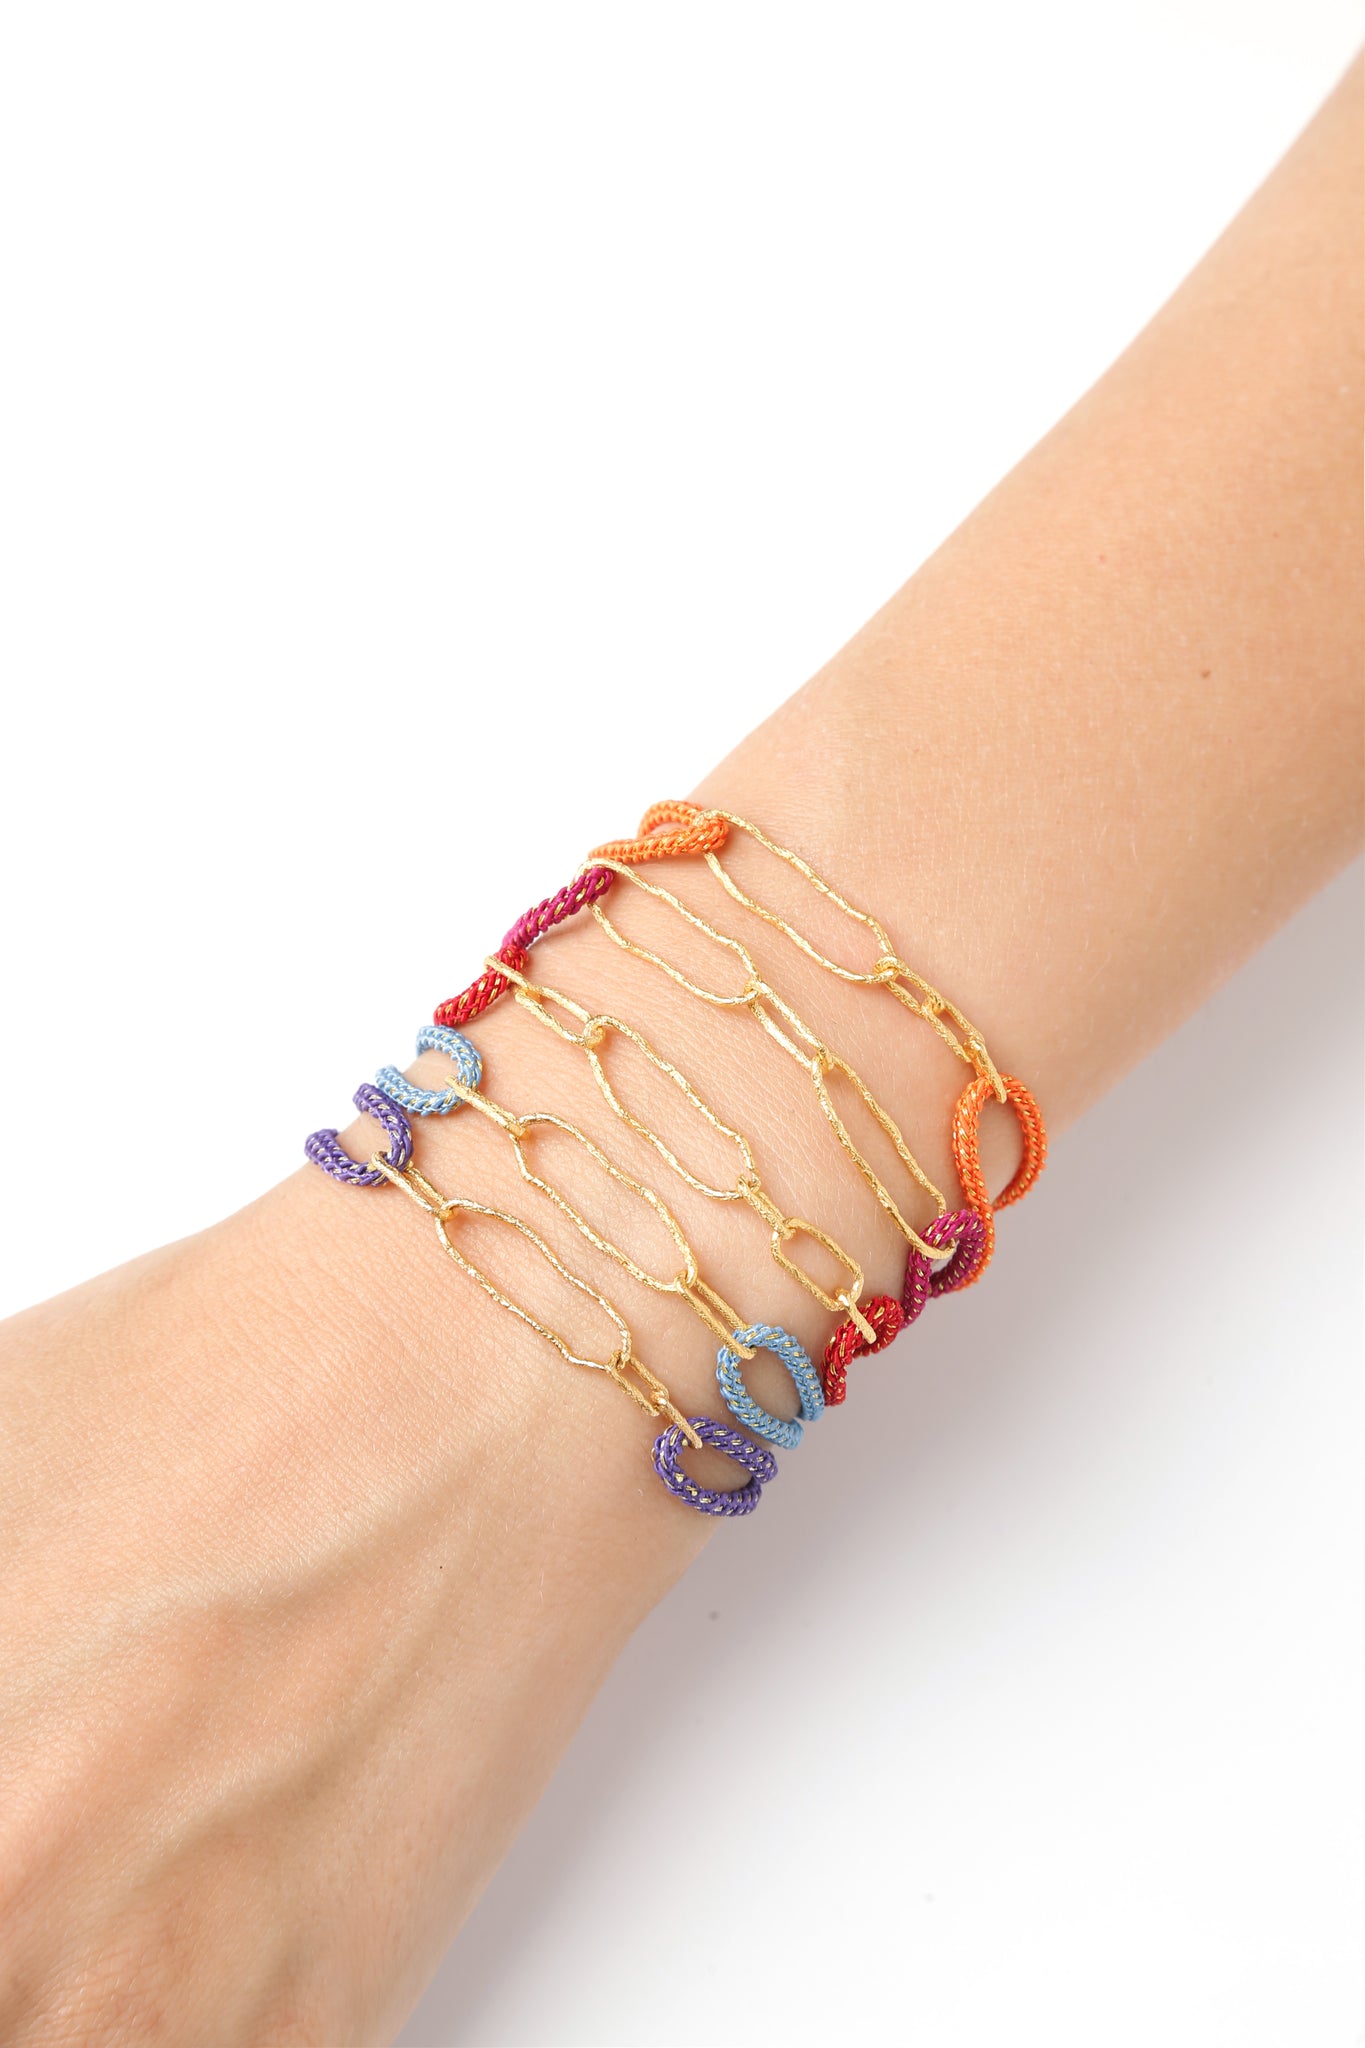 Tuft and Paperclip bracelet